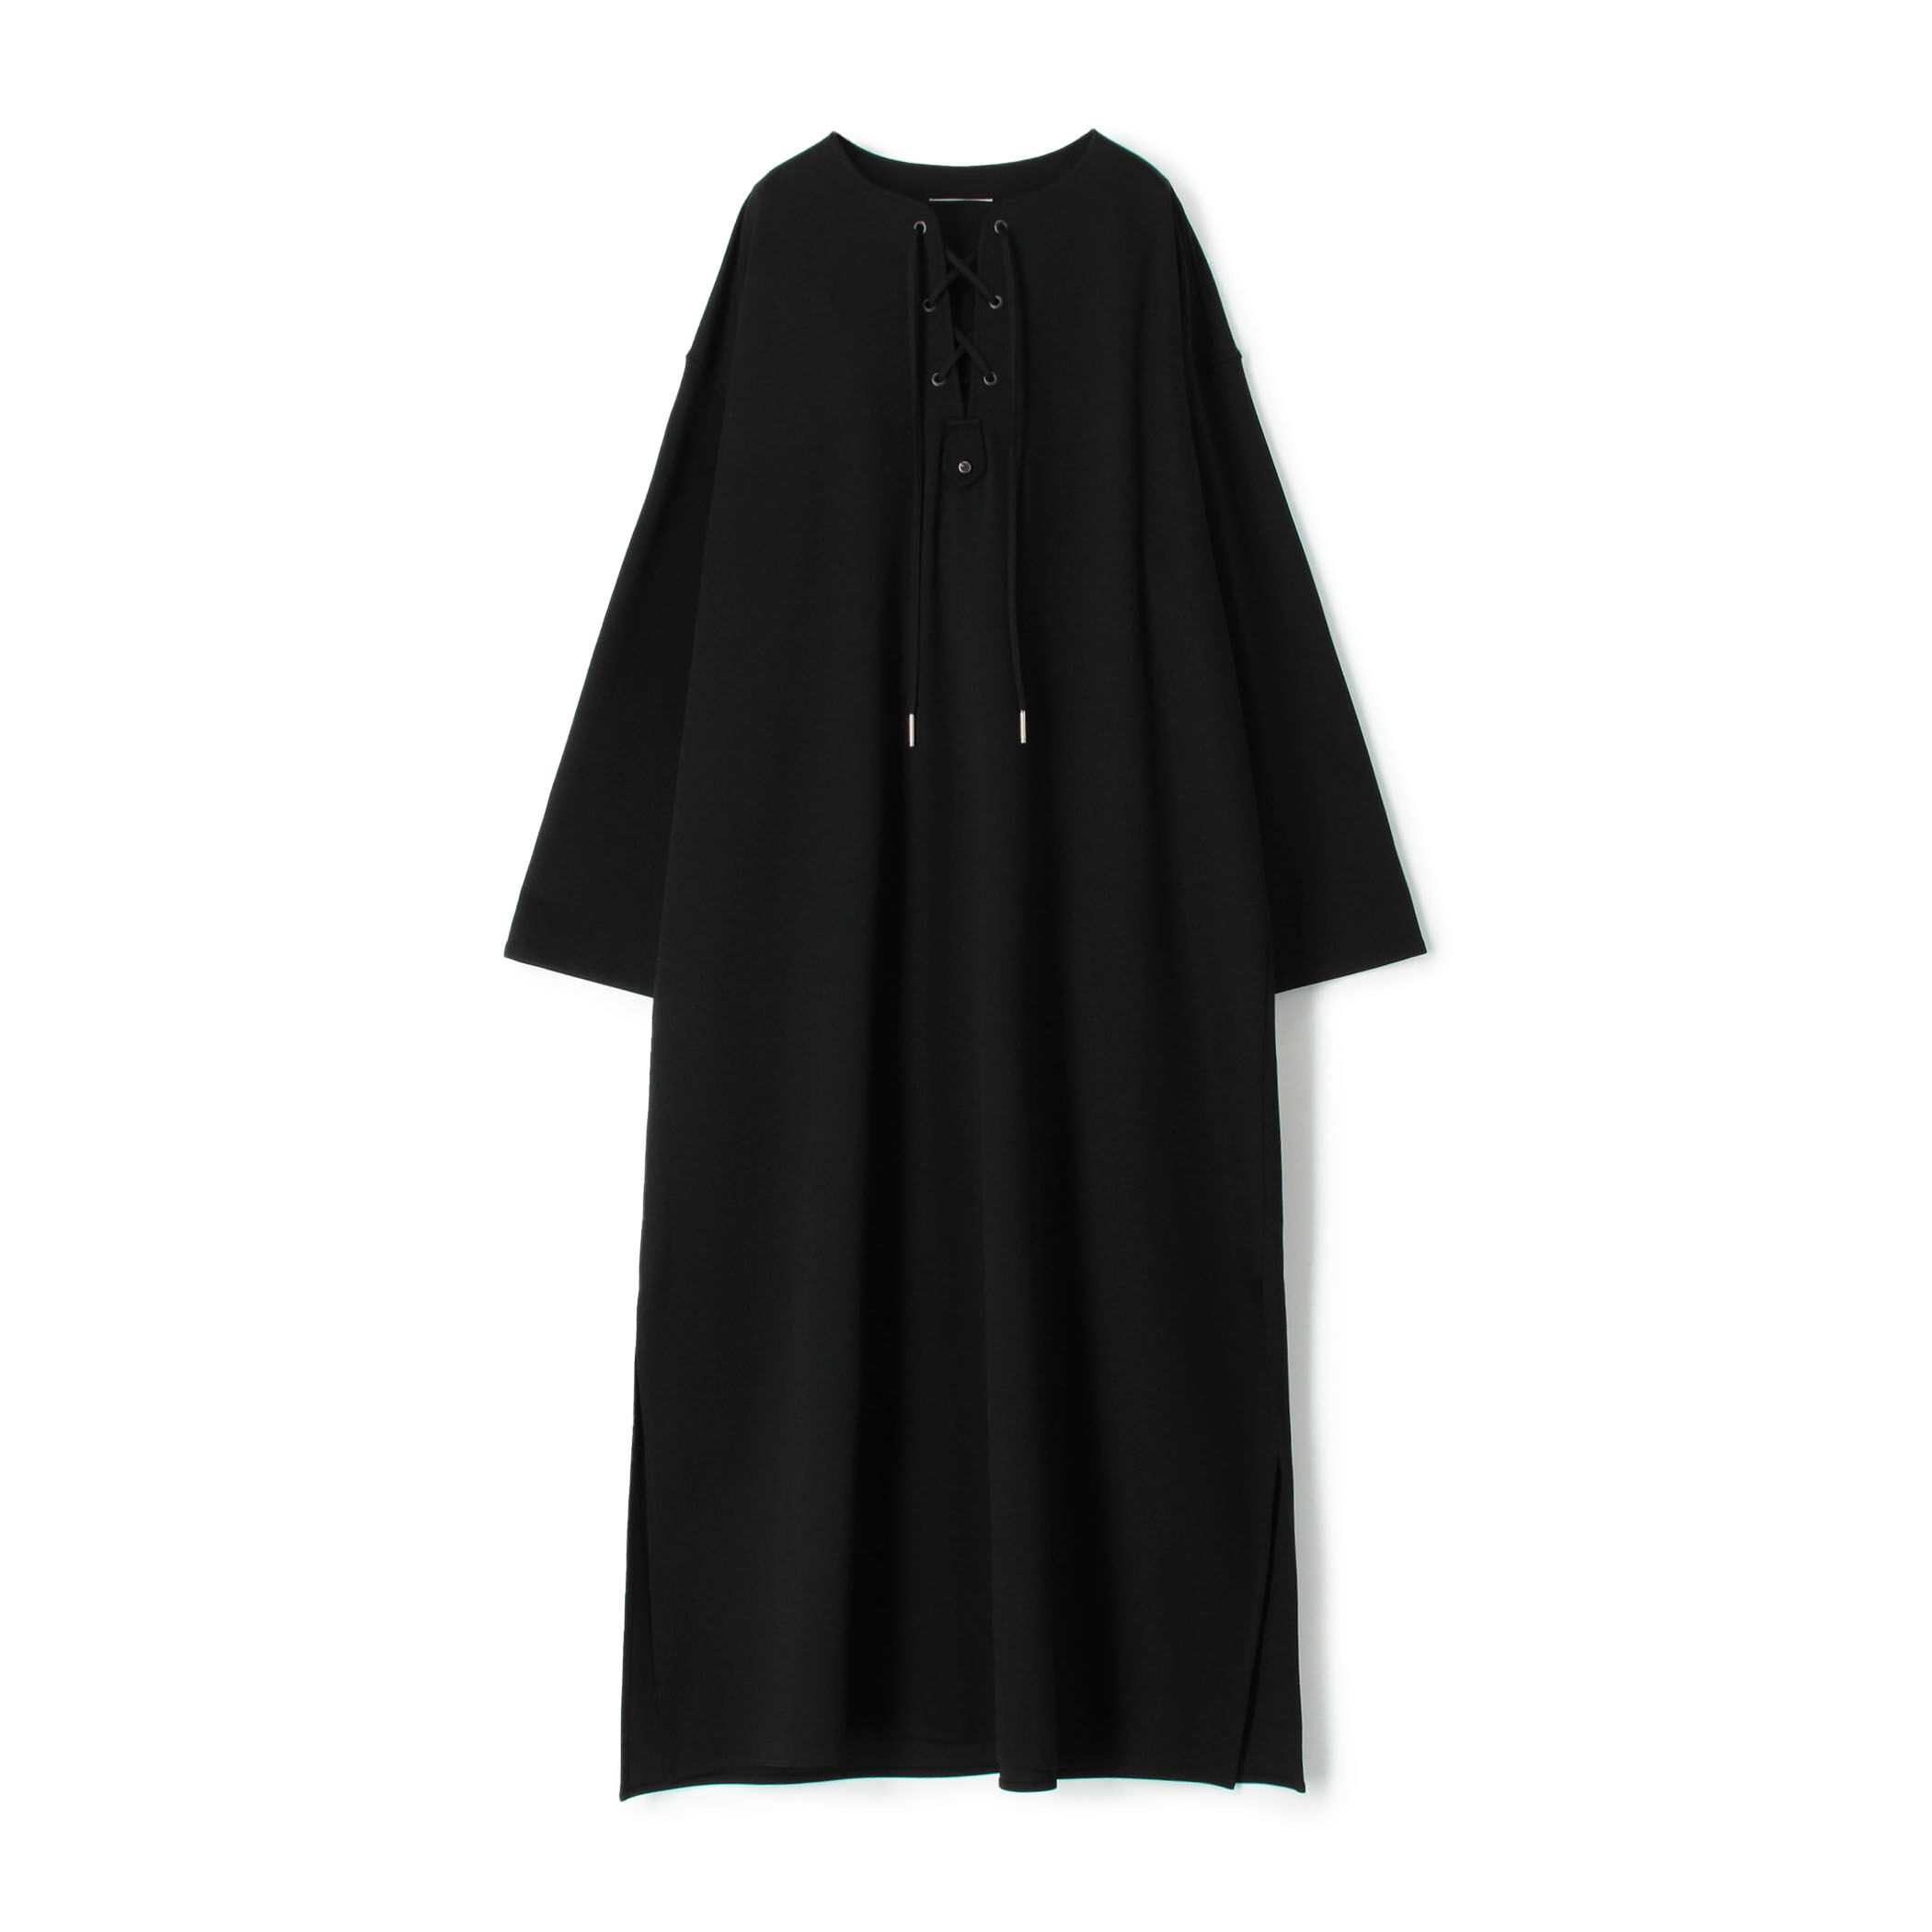 Edition×THE RERACS Collaboration Label MARIN DRESS